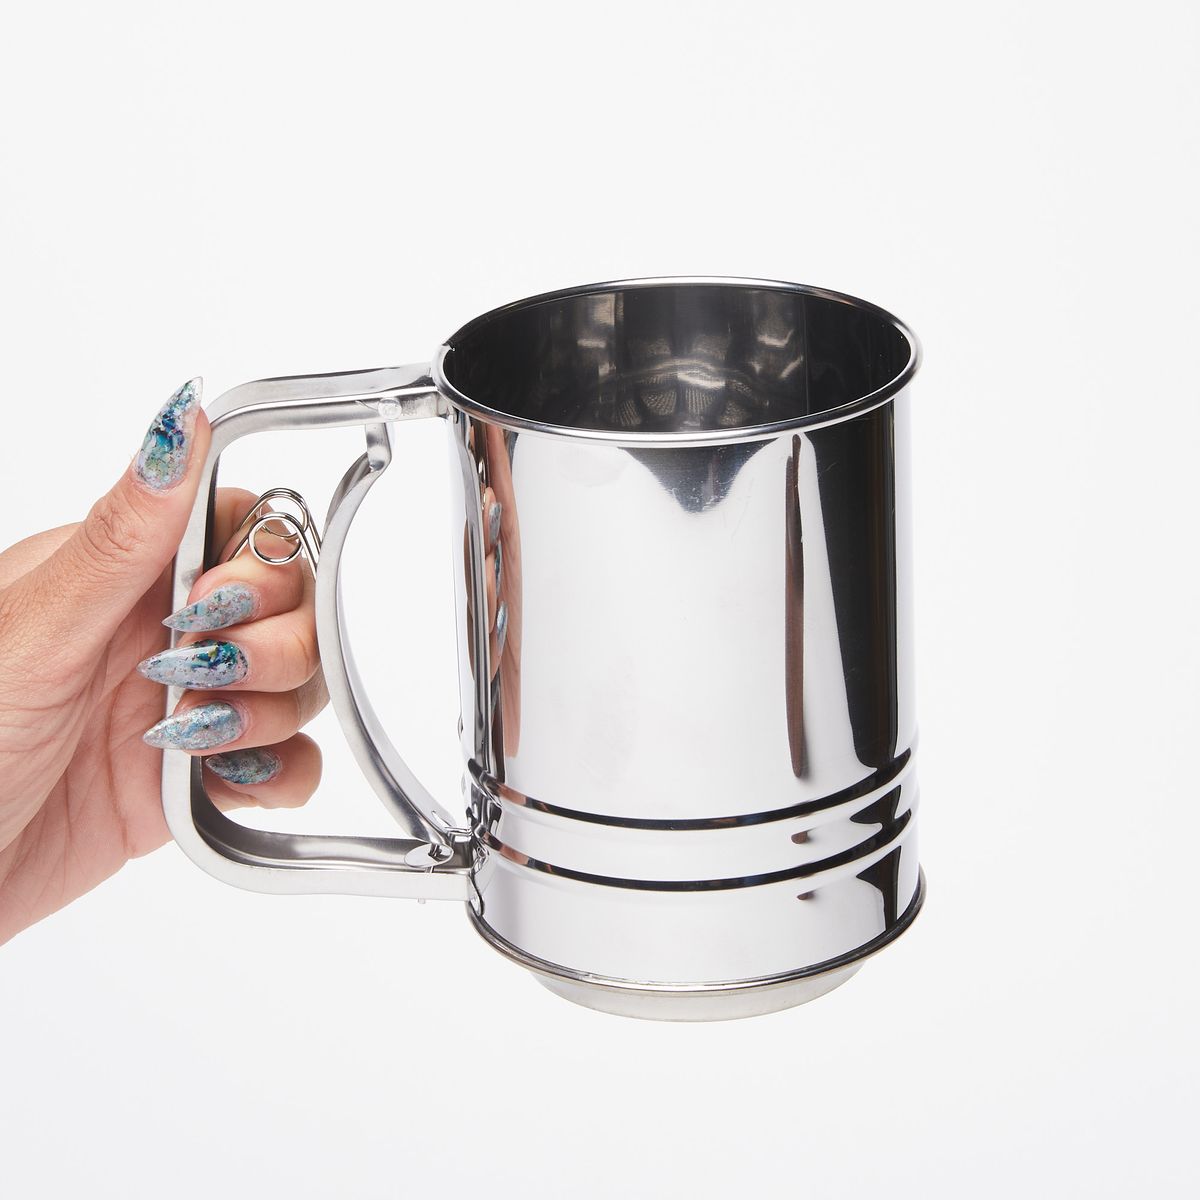 Hand holding a shiny metal flour sifter